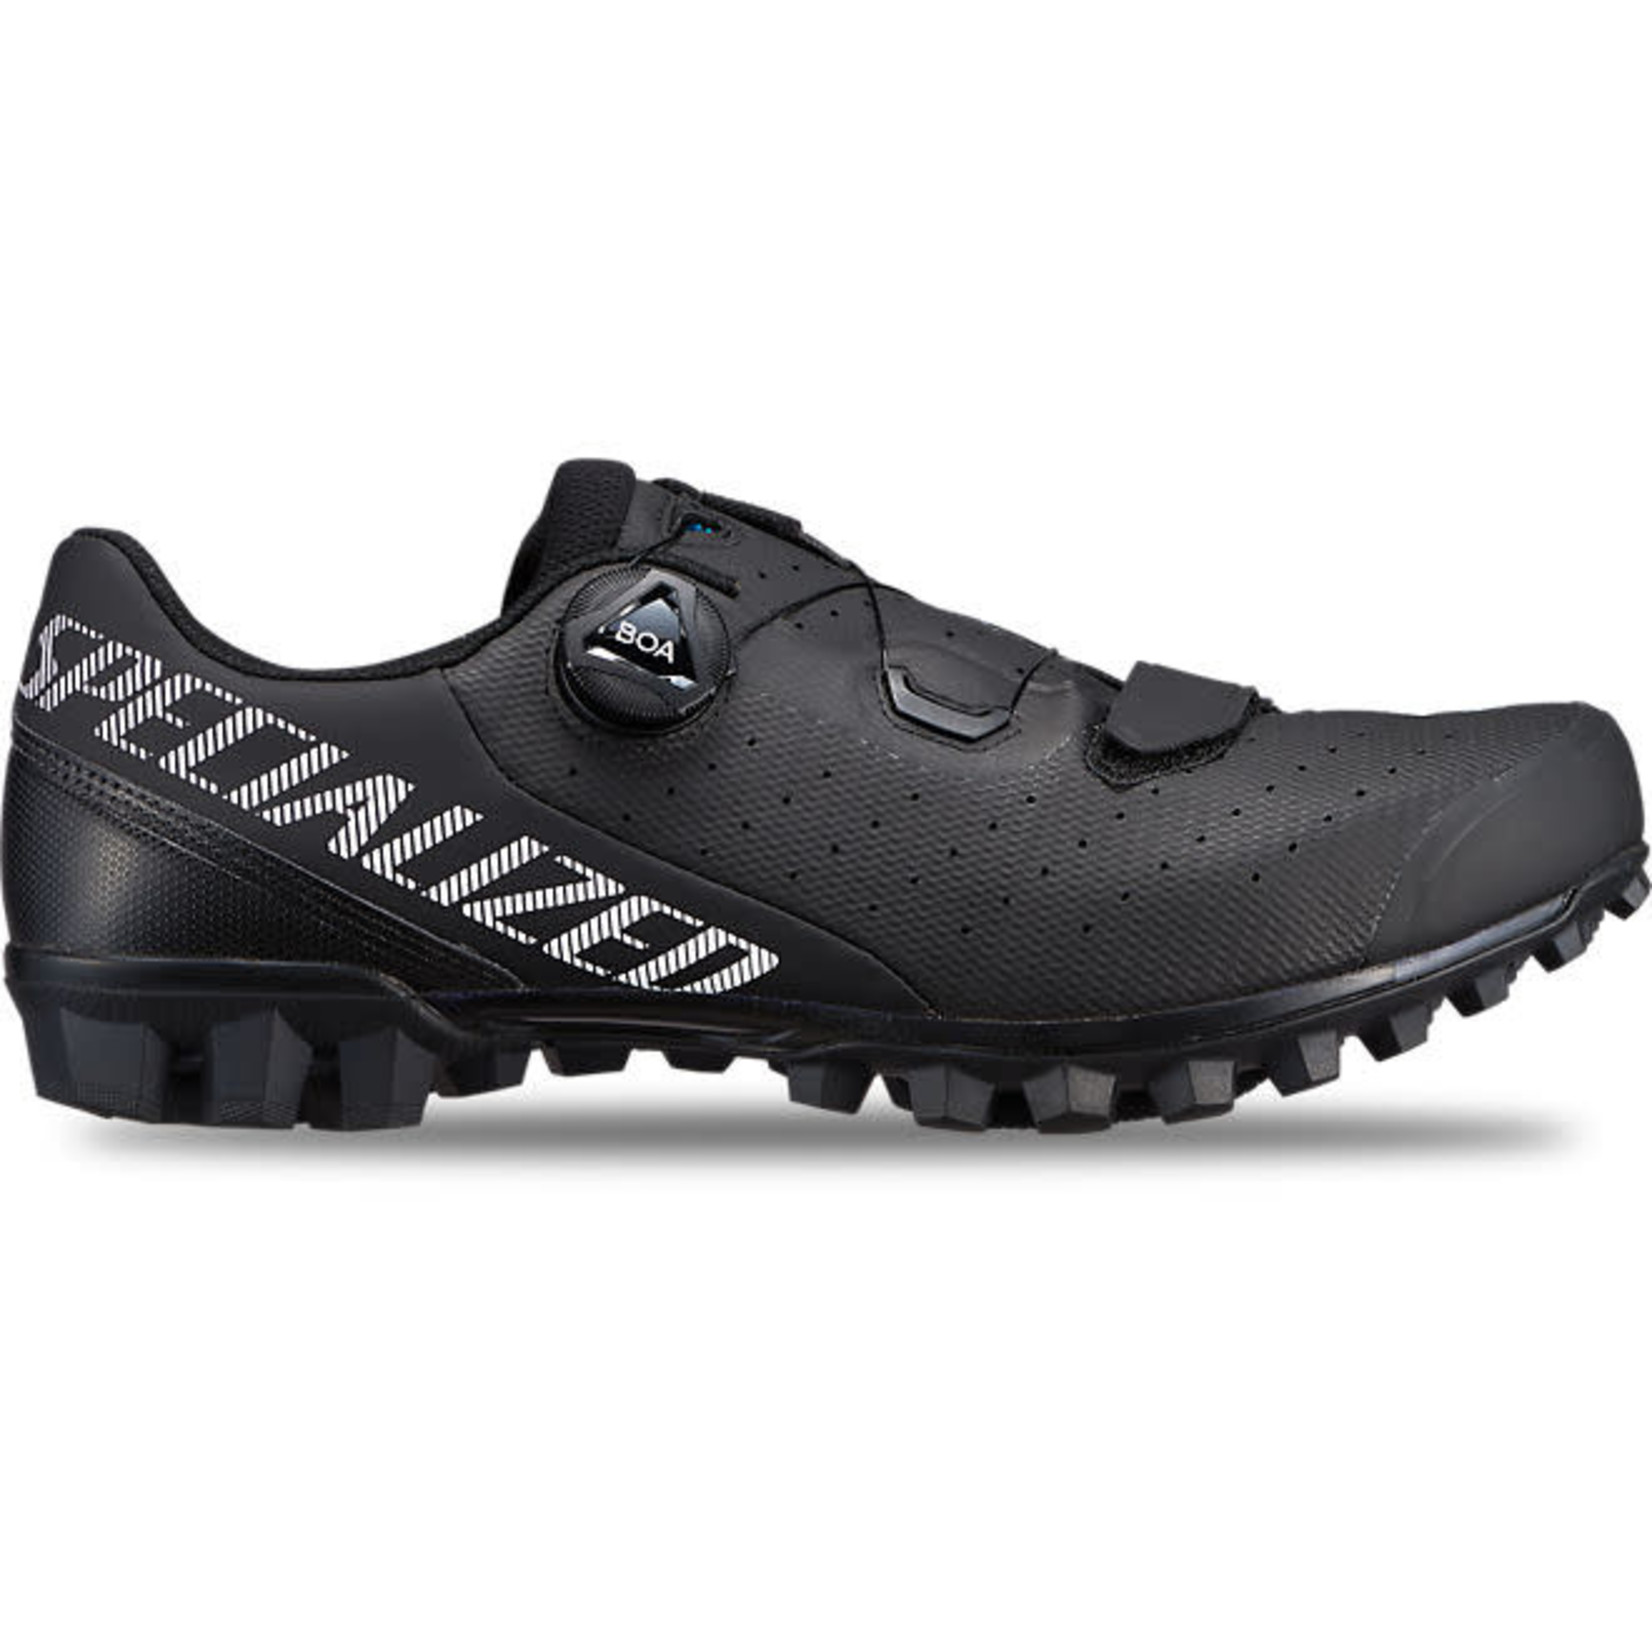 SPECIALIZED Recon 2.0 Mountain Bike Shoes Wide